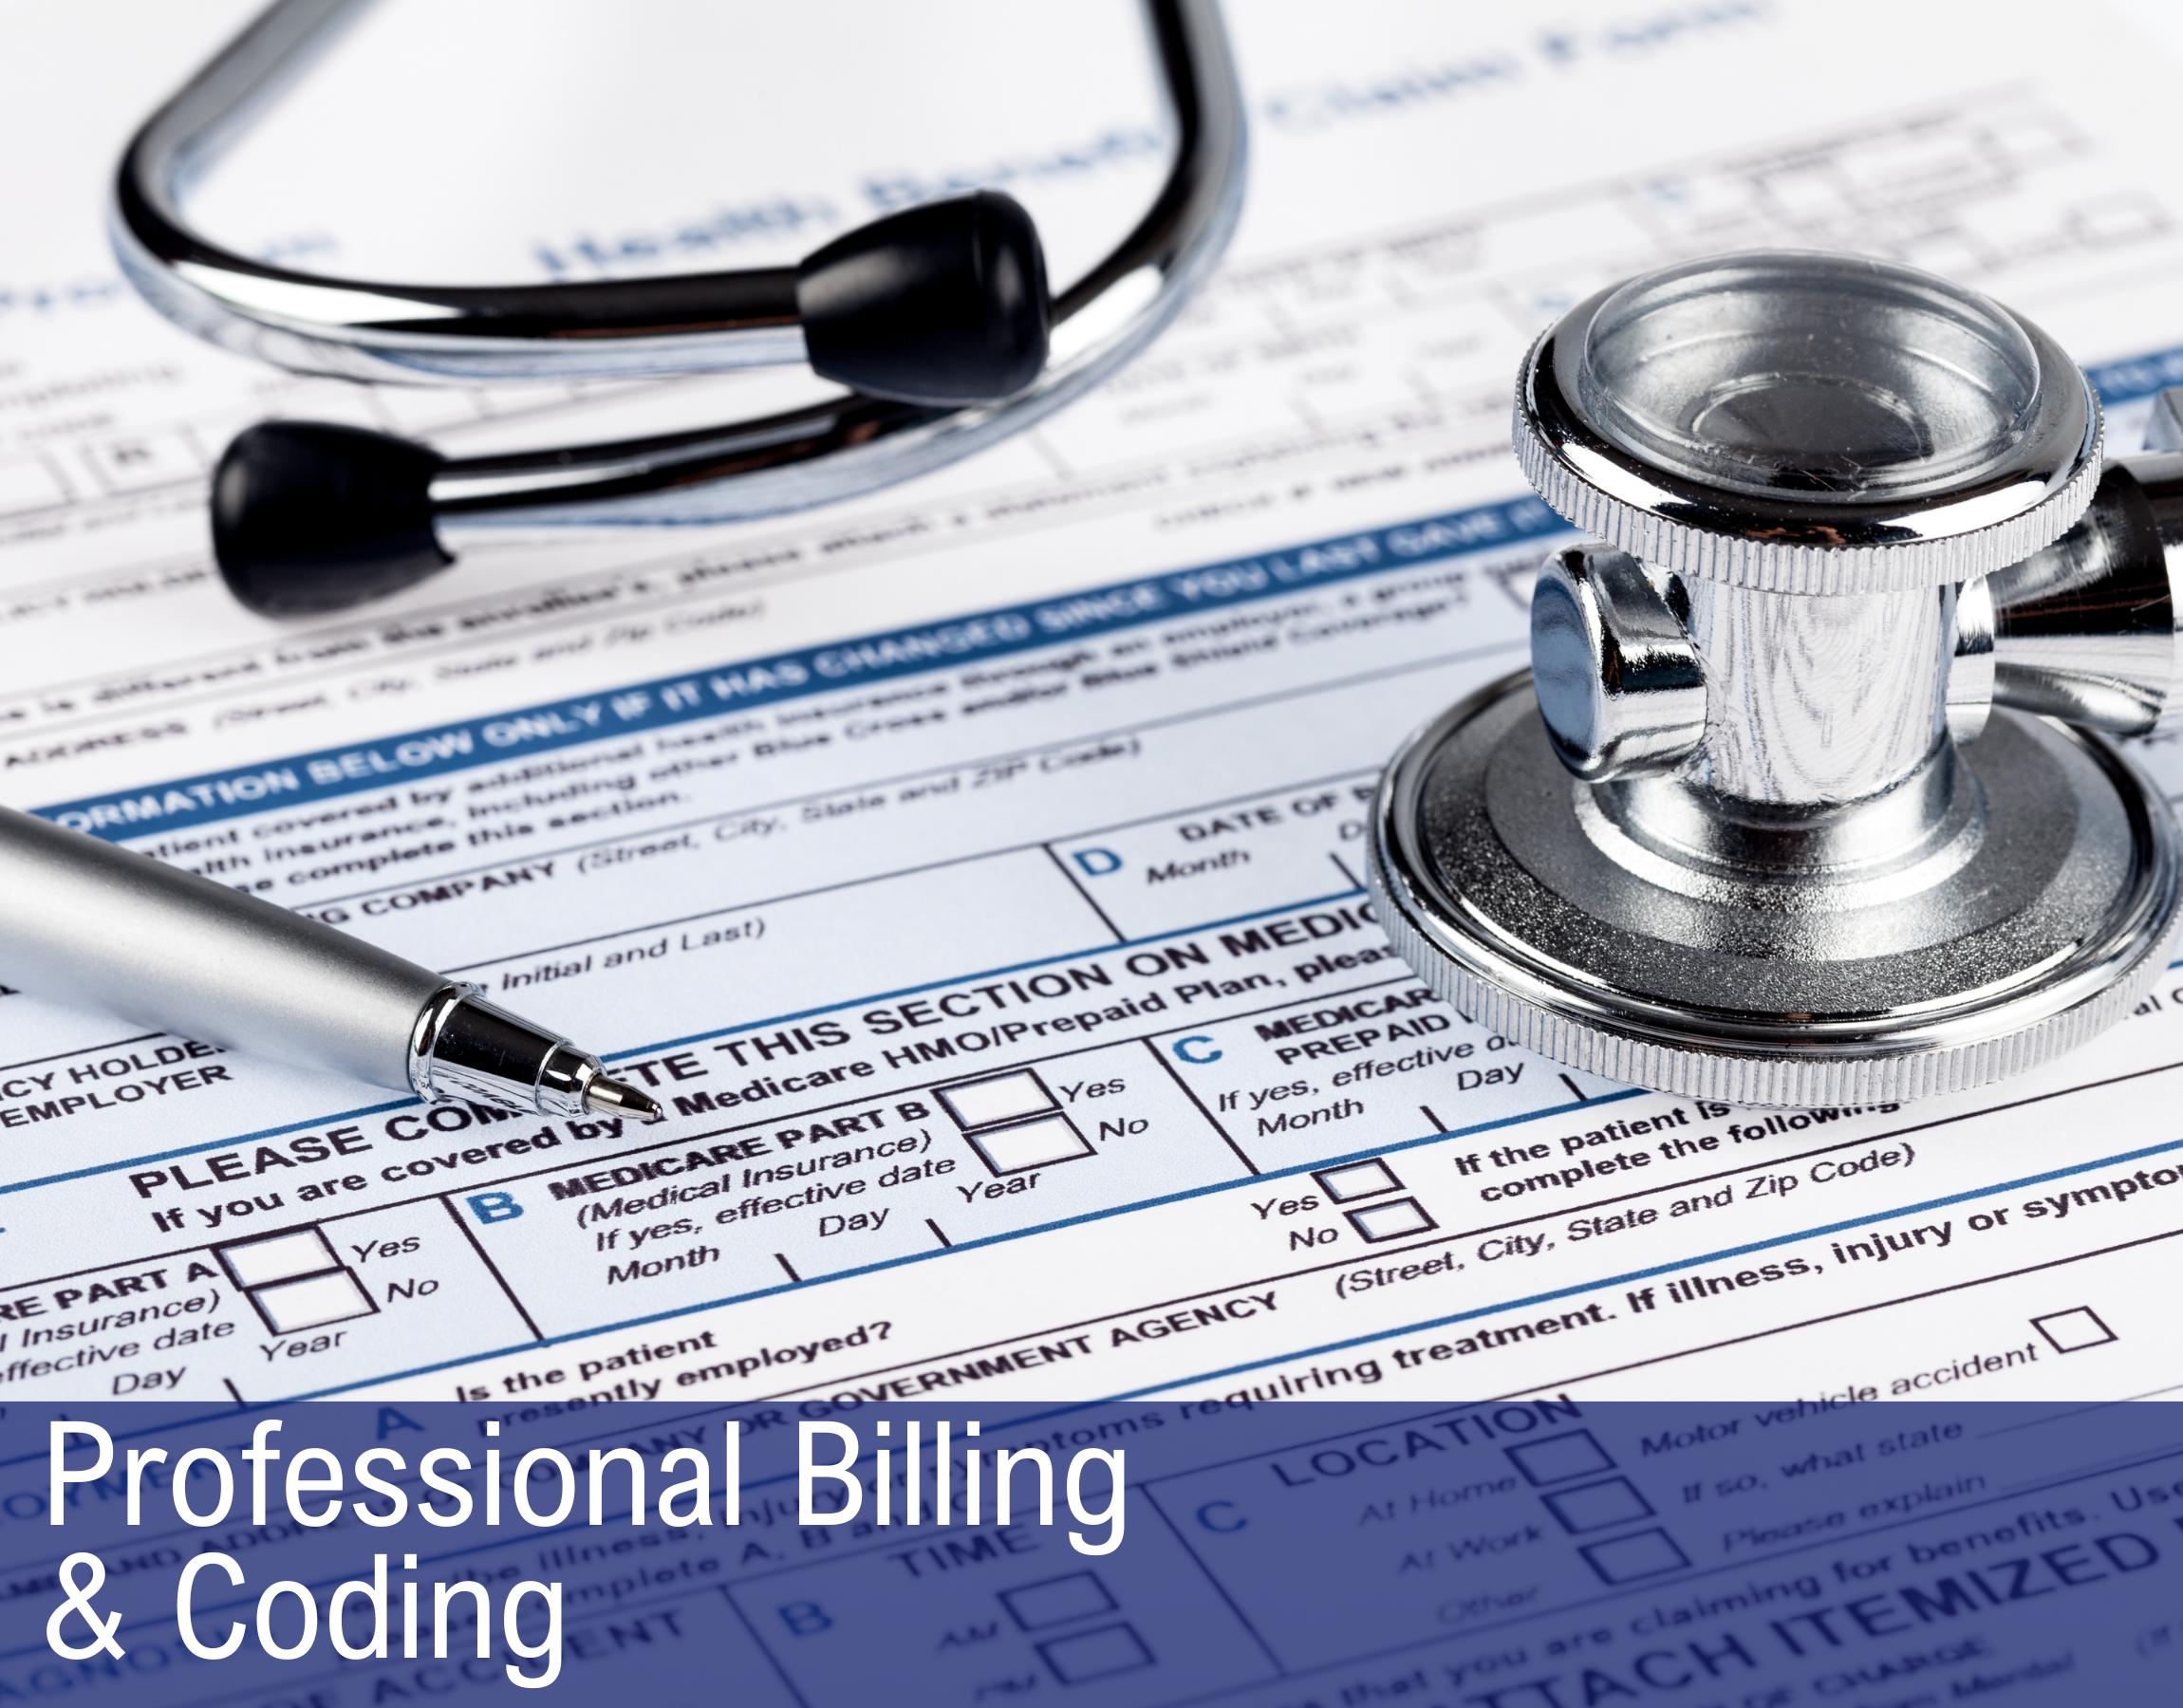 PROFESSIONAL BILLING AND CODING